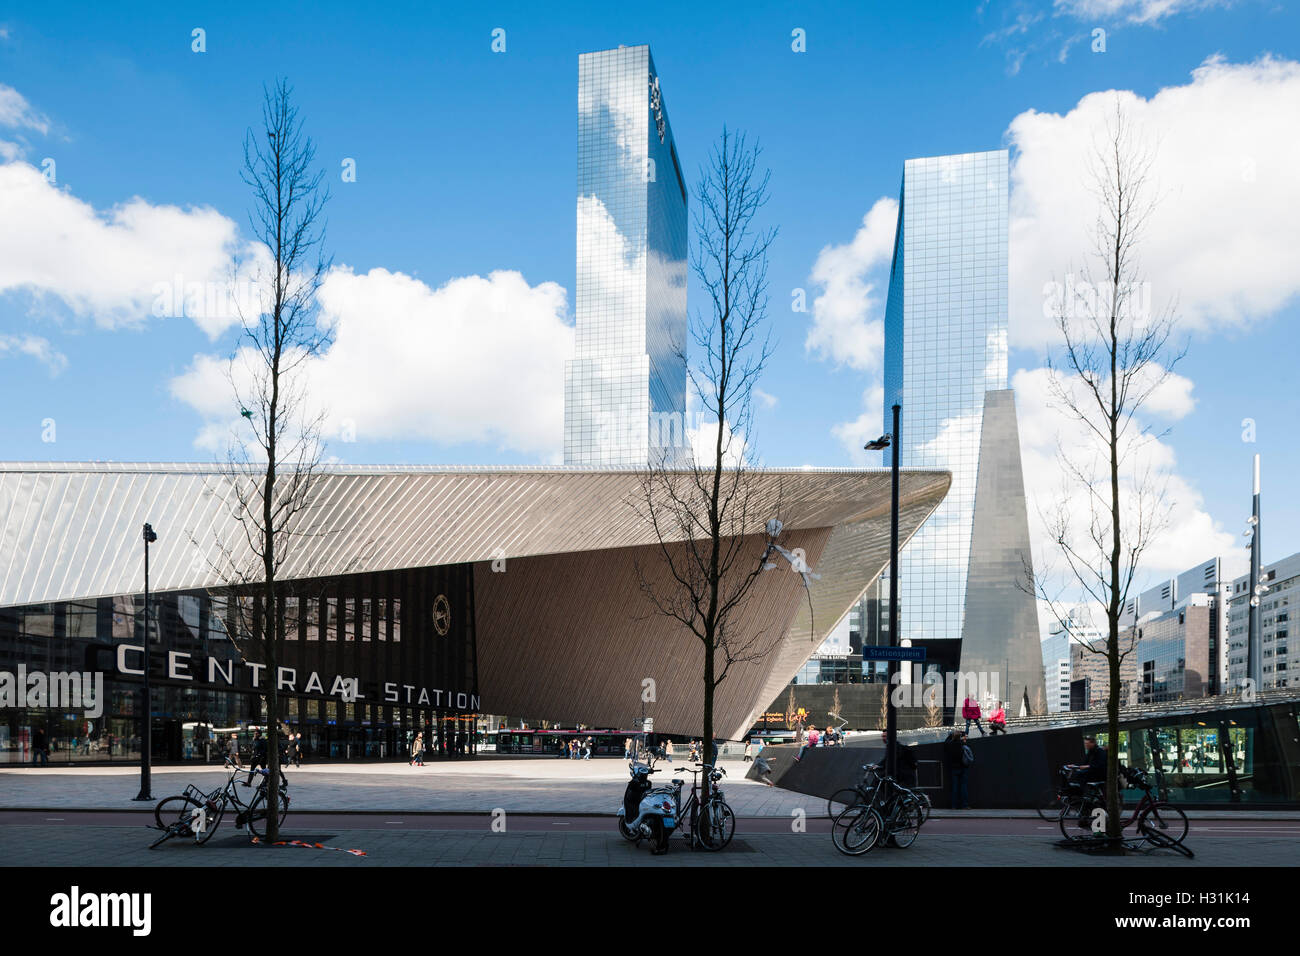 View of public plaza and angular metal-clad canopy with pedestrians. Centraal Station, Rotterdam, Netherlands. Architect: Benthem Crouwel Architects + MVSA Architects + Wes, 2014. Stock Photo